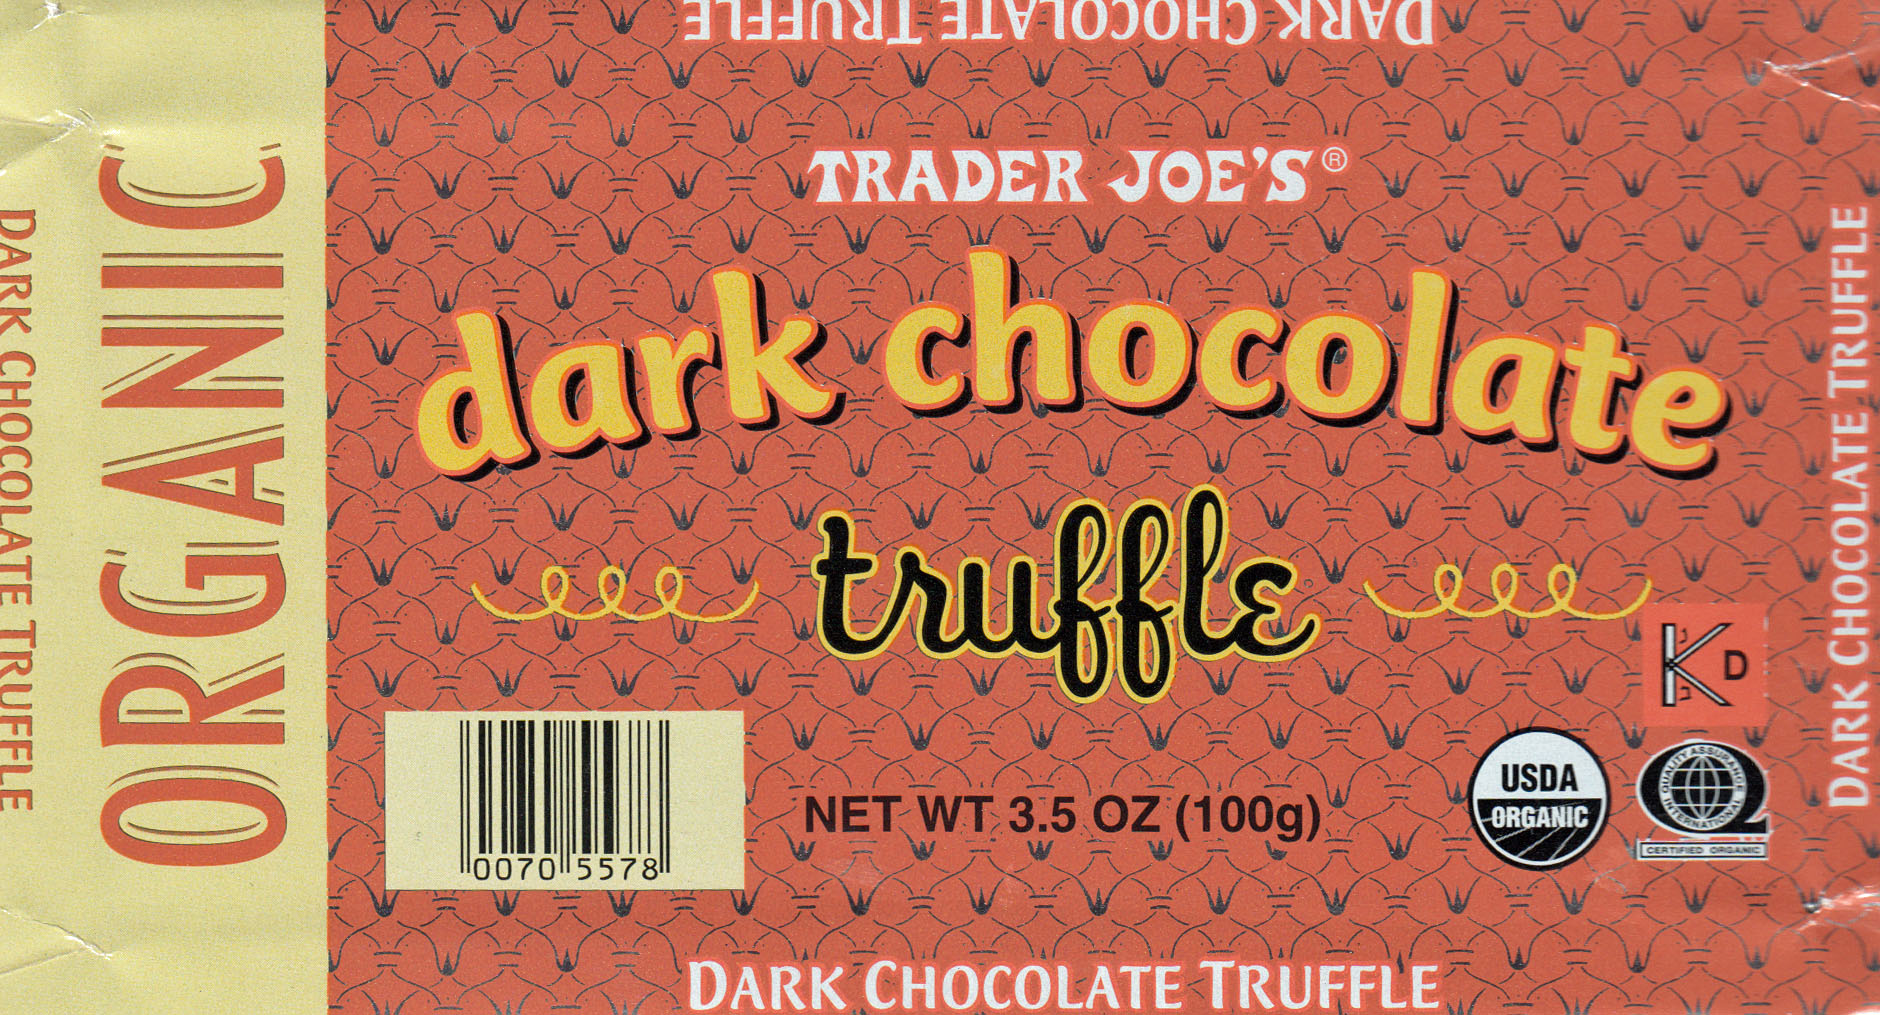 Image result for trader joes dark chocolate truffle bar